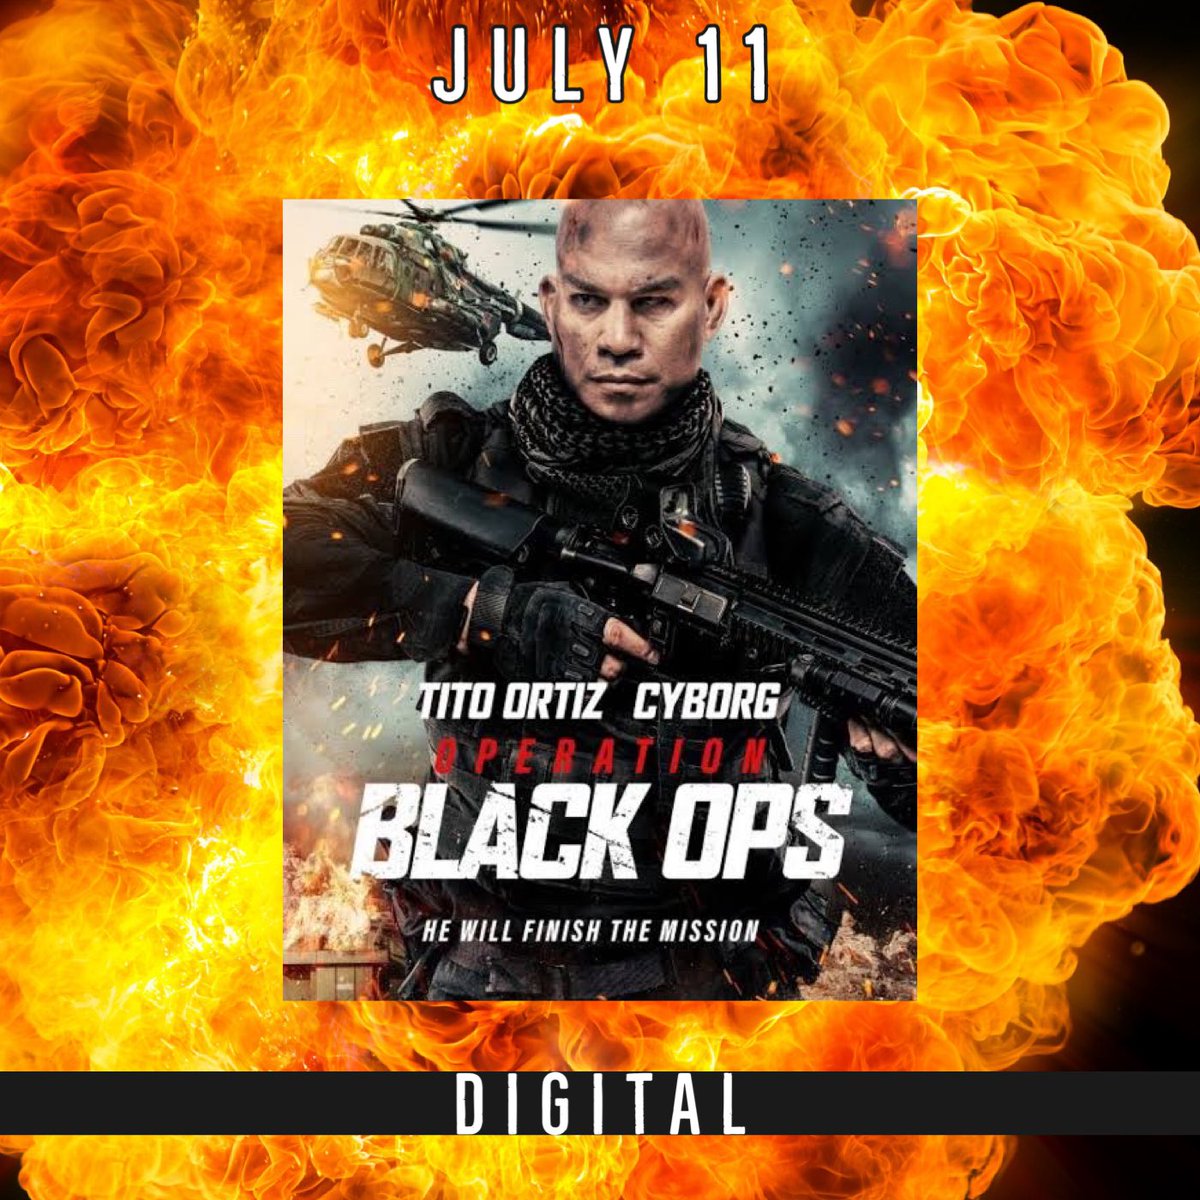 Explosive to say the least, OPERATION BLACK OPS is available on digital platforms including ITunes and Amazon July 11!